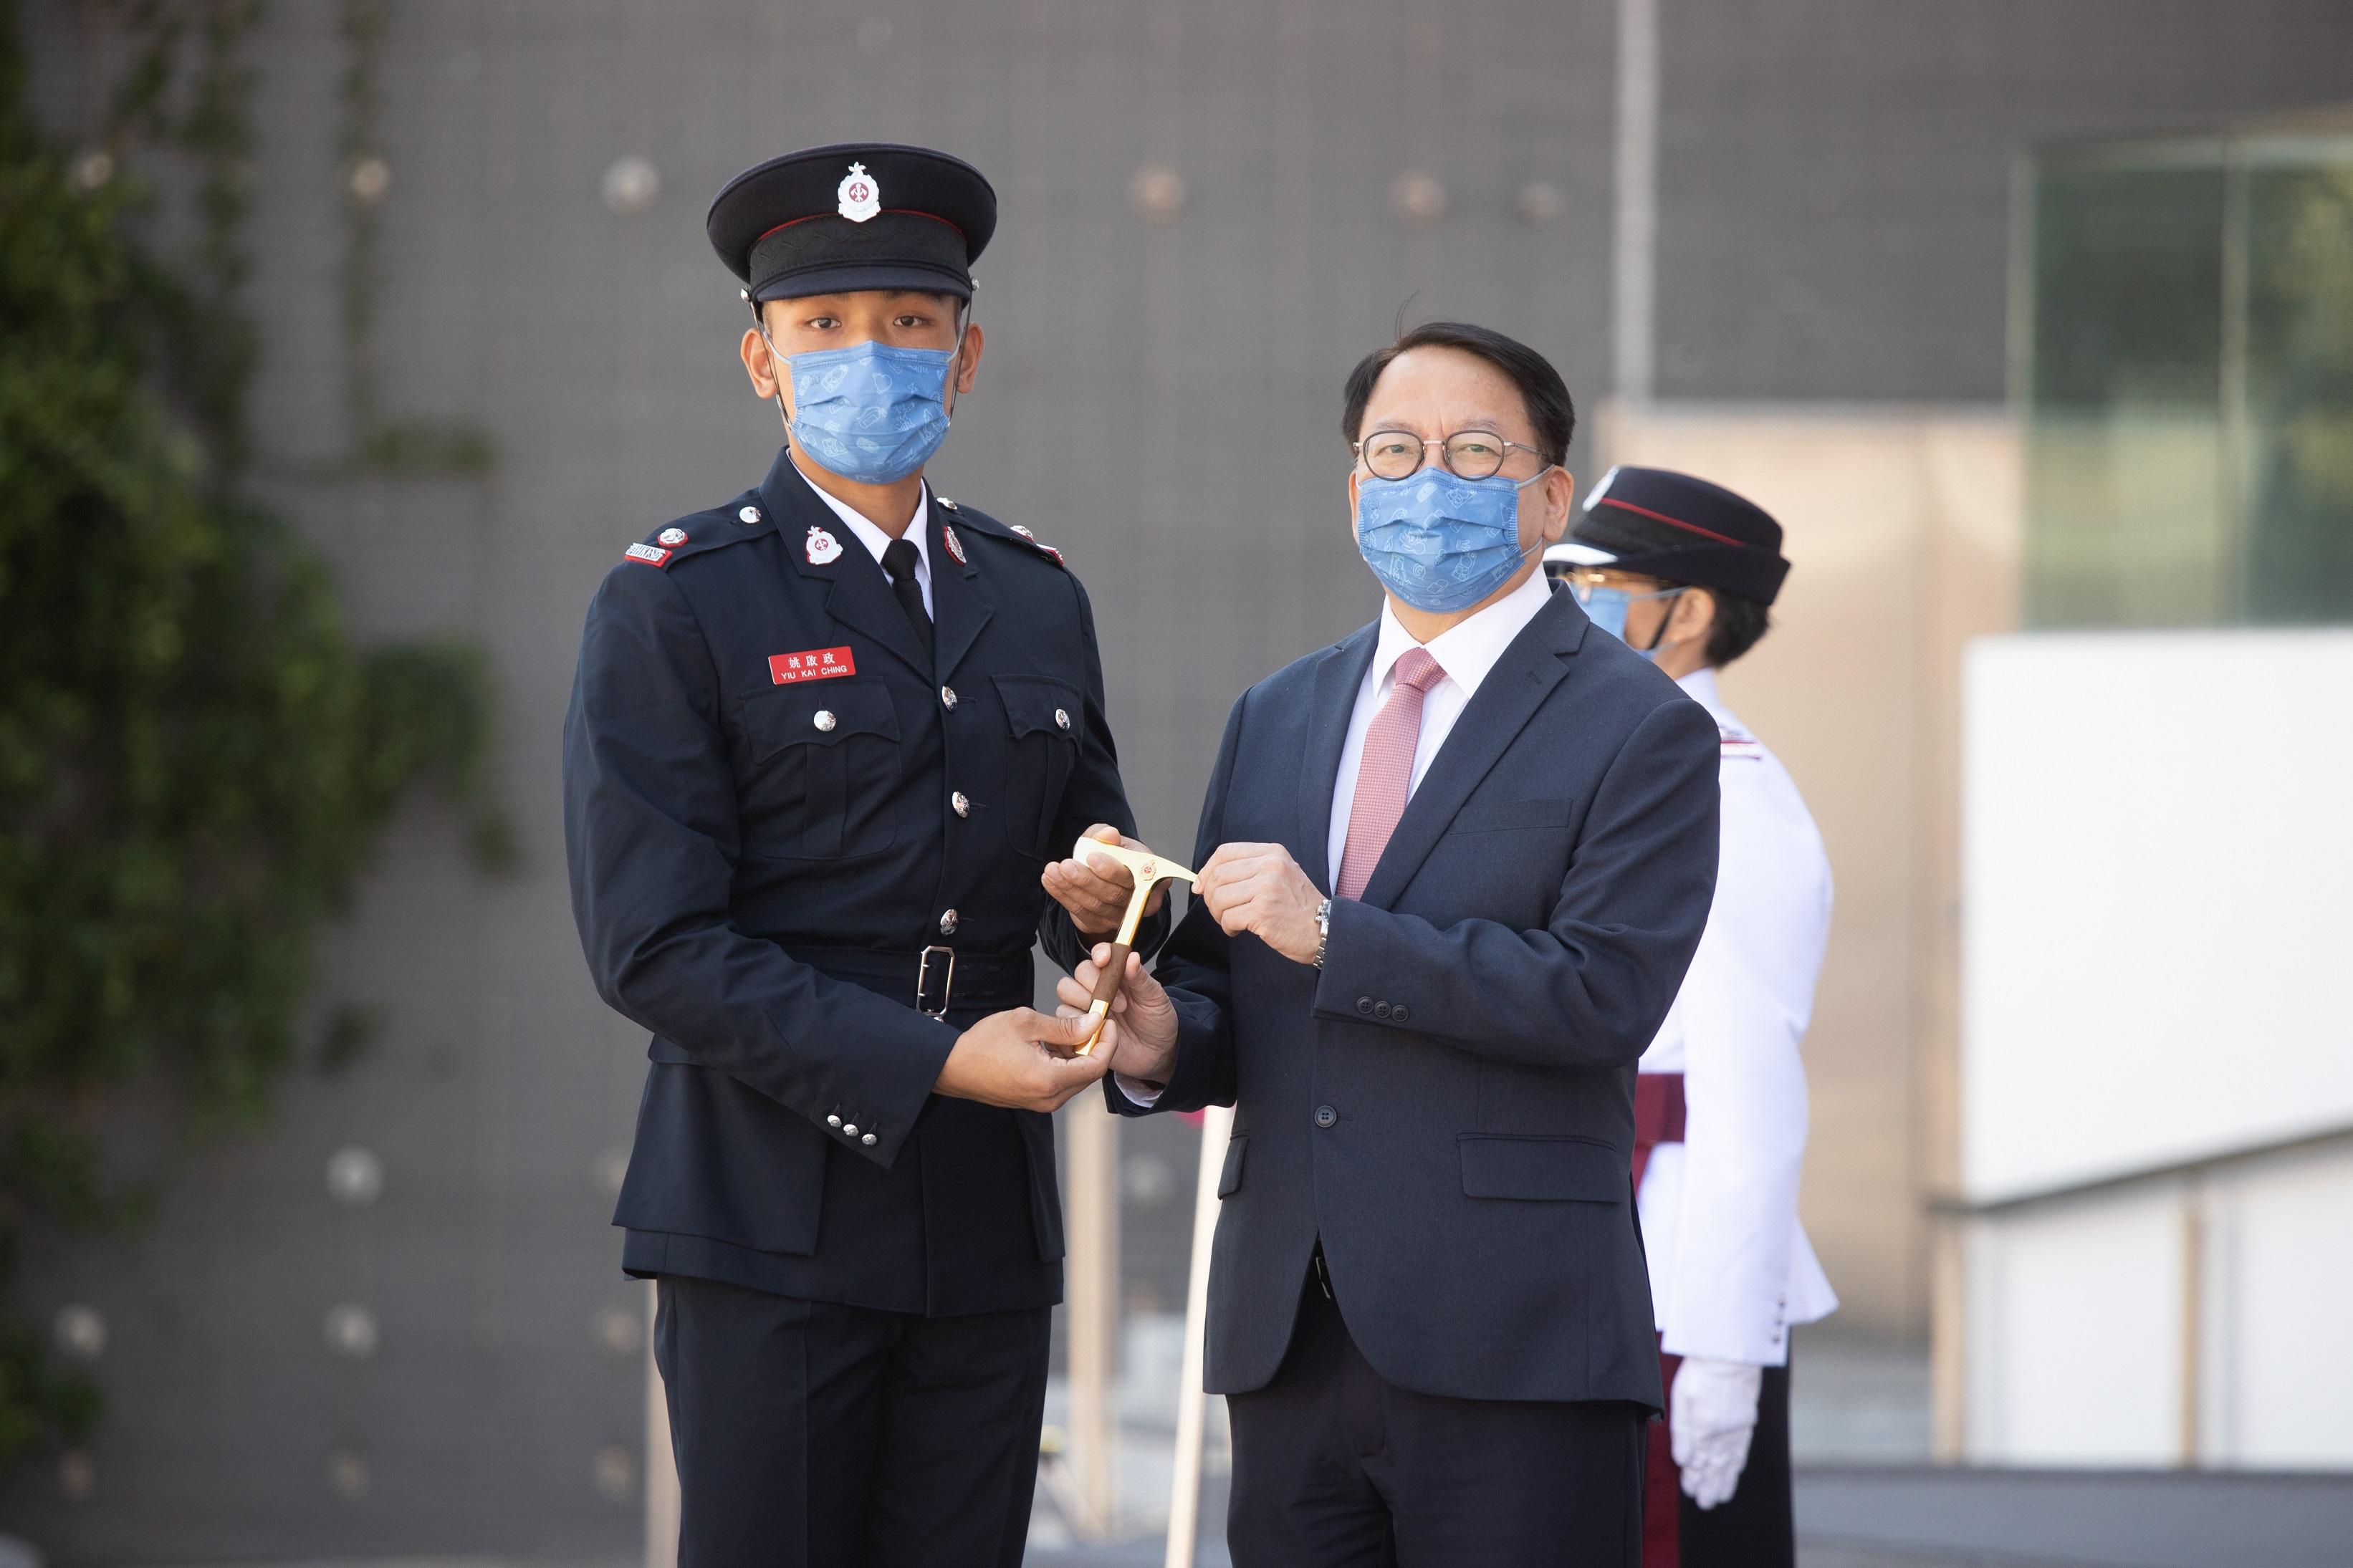 The Chief Secretary for Administration, Mr Chan Kwok-ki, reviewed the Fire Services passing-out parade at the Fire and Ambulance Services Academy today (October 21). Photo shows Mr Chan (right) presenting the Best Recruit Station Officer award to a graduate.